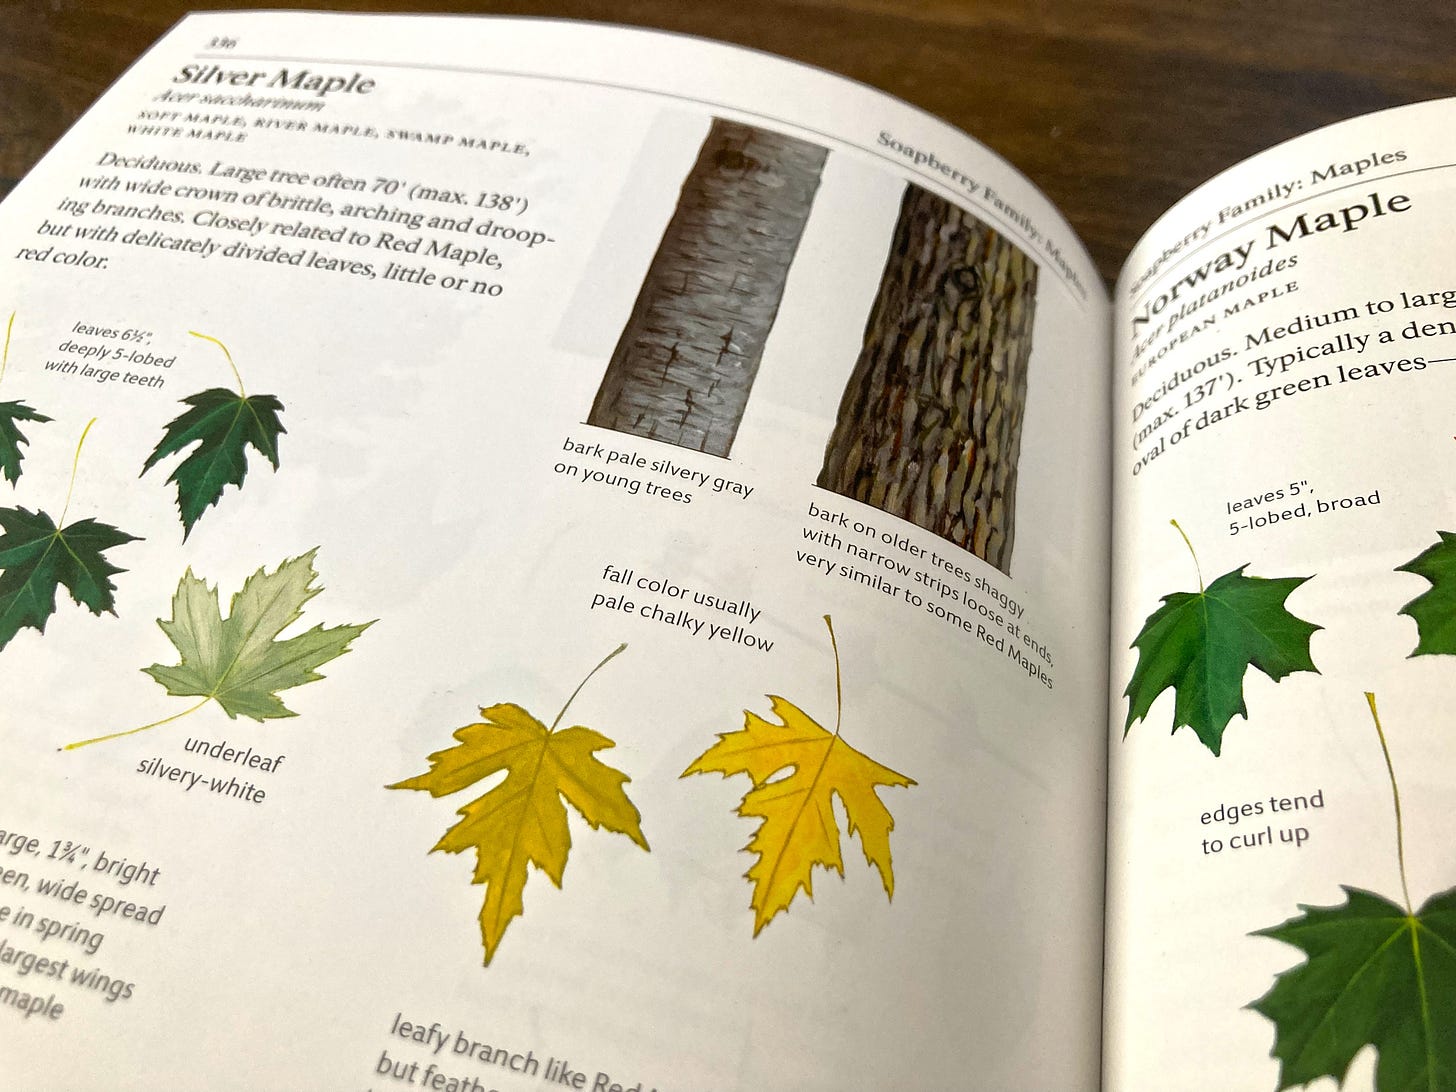 A spread from The Sibley Guide to Trees, showing illustrations of leaves and bark for Silver Maples and Norway Maples